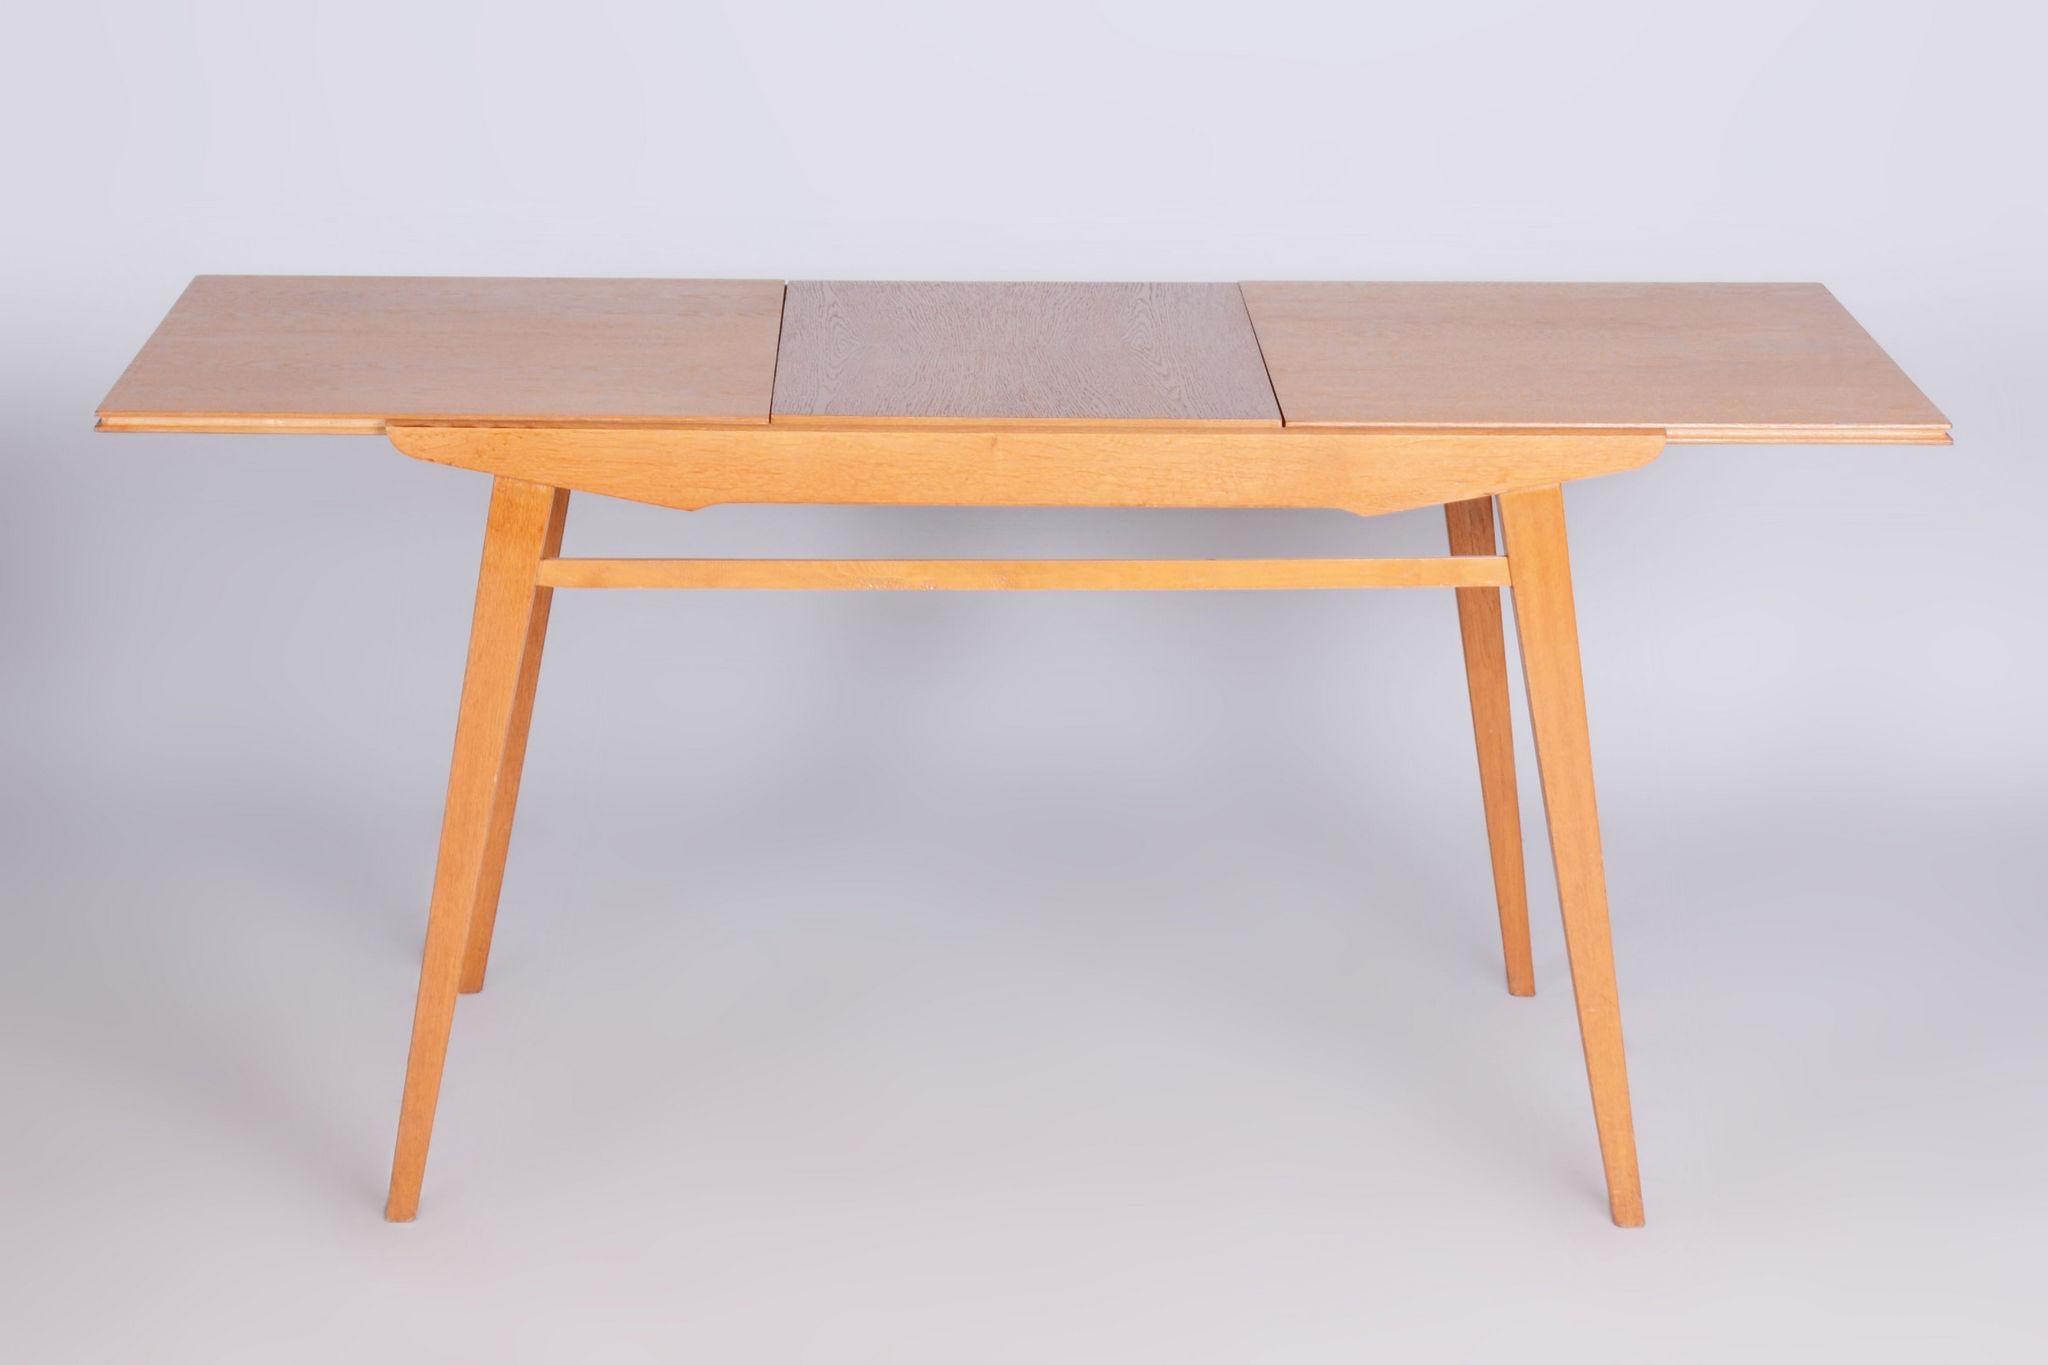 Restored Midcentury Oak Extendable Dining Table, Revived Polish, Czechia, 1950s For Sale 4